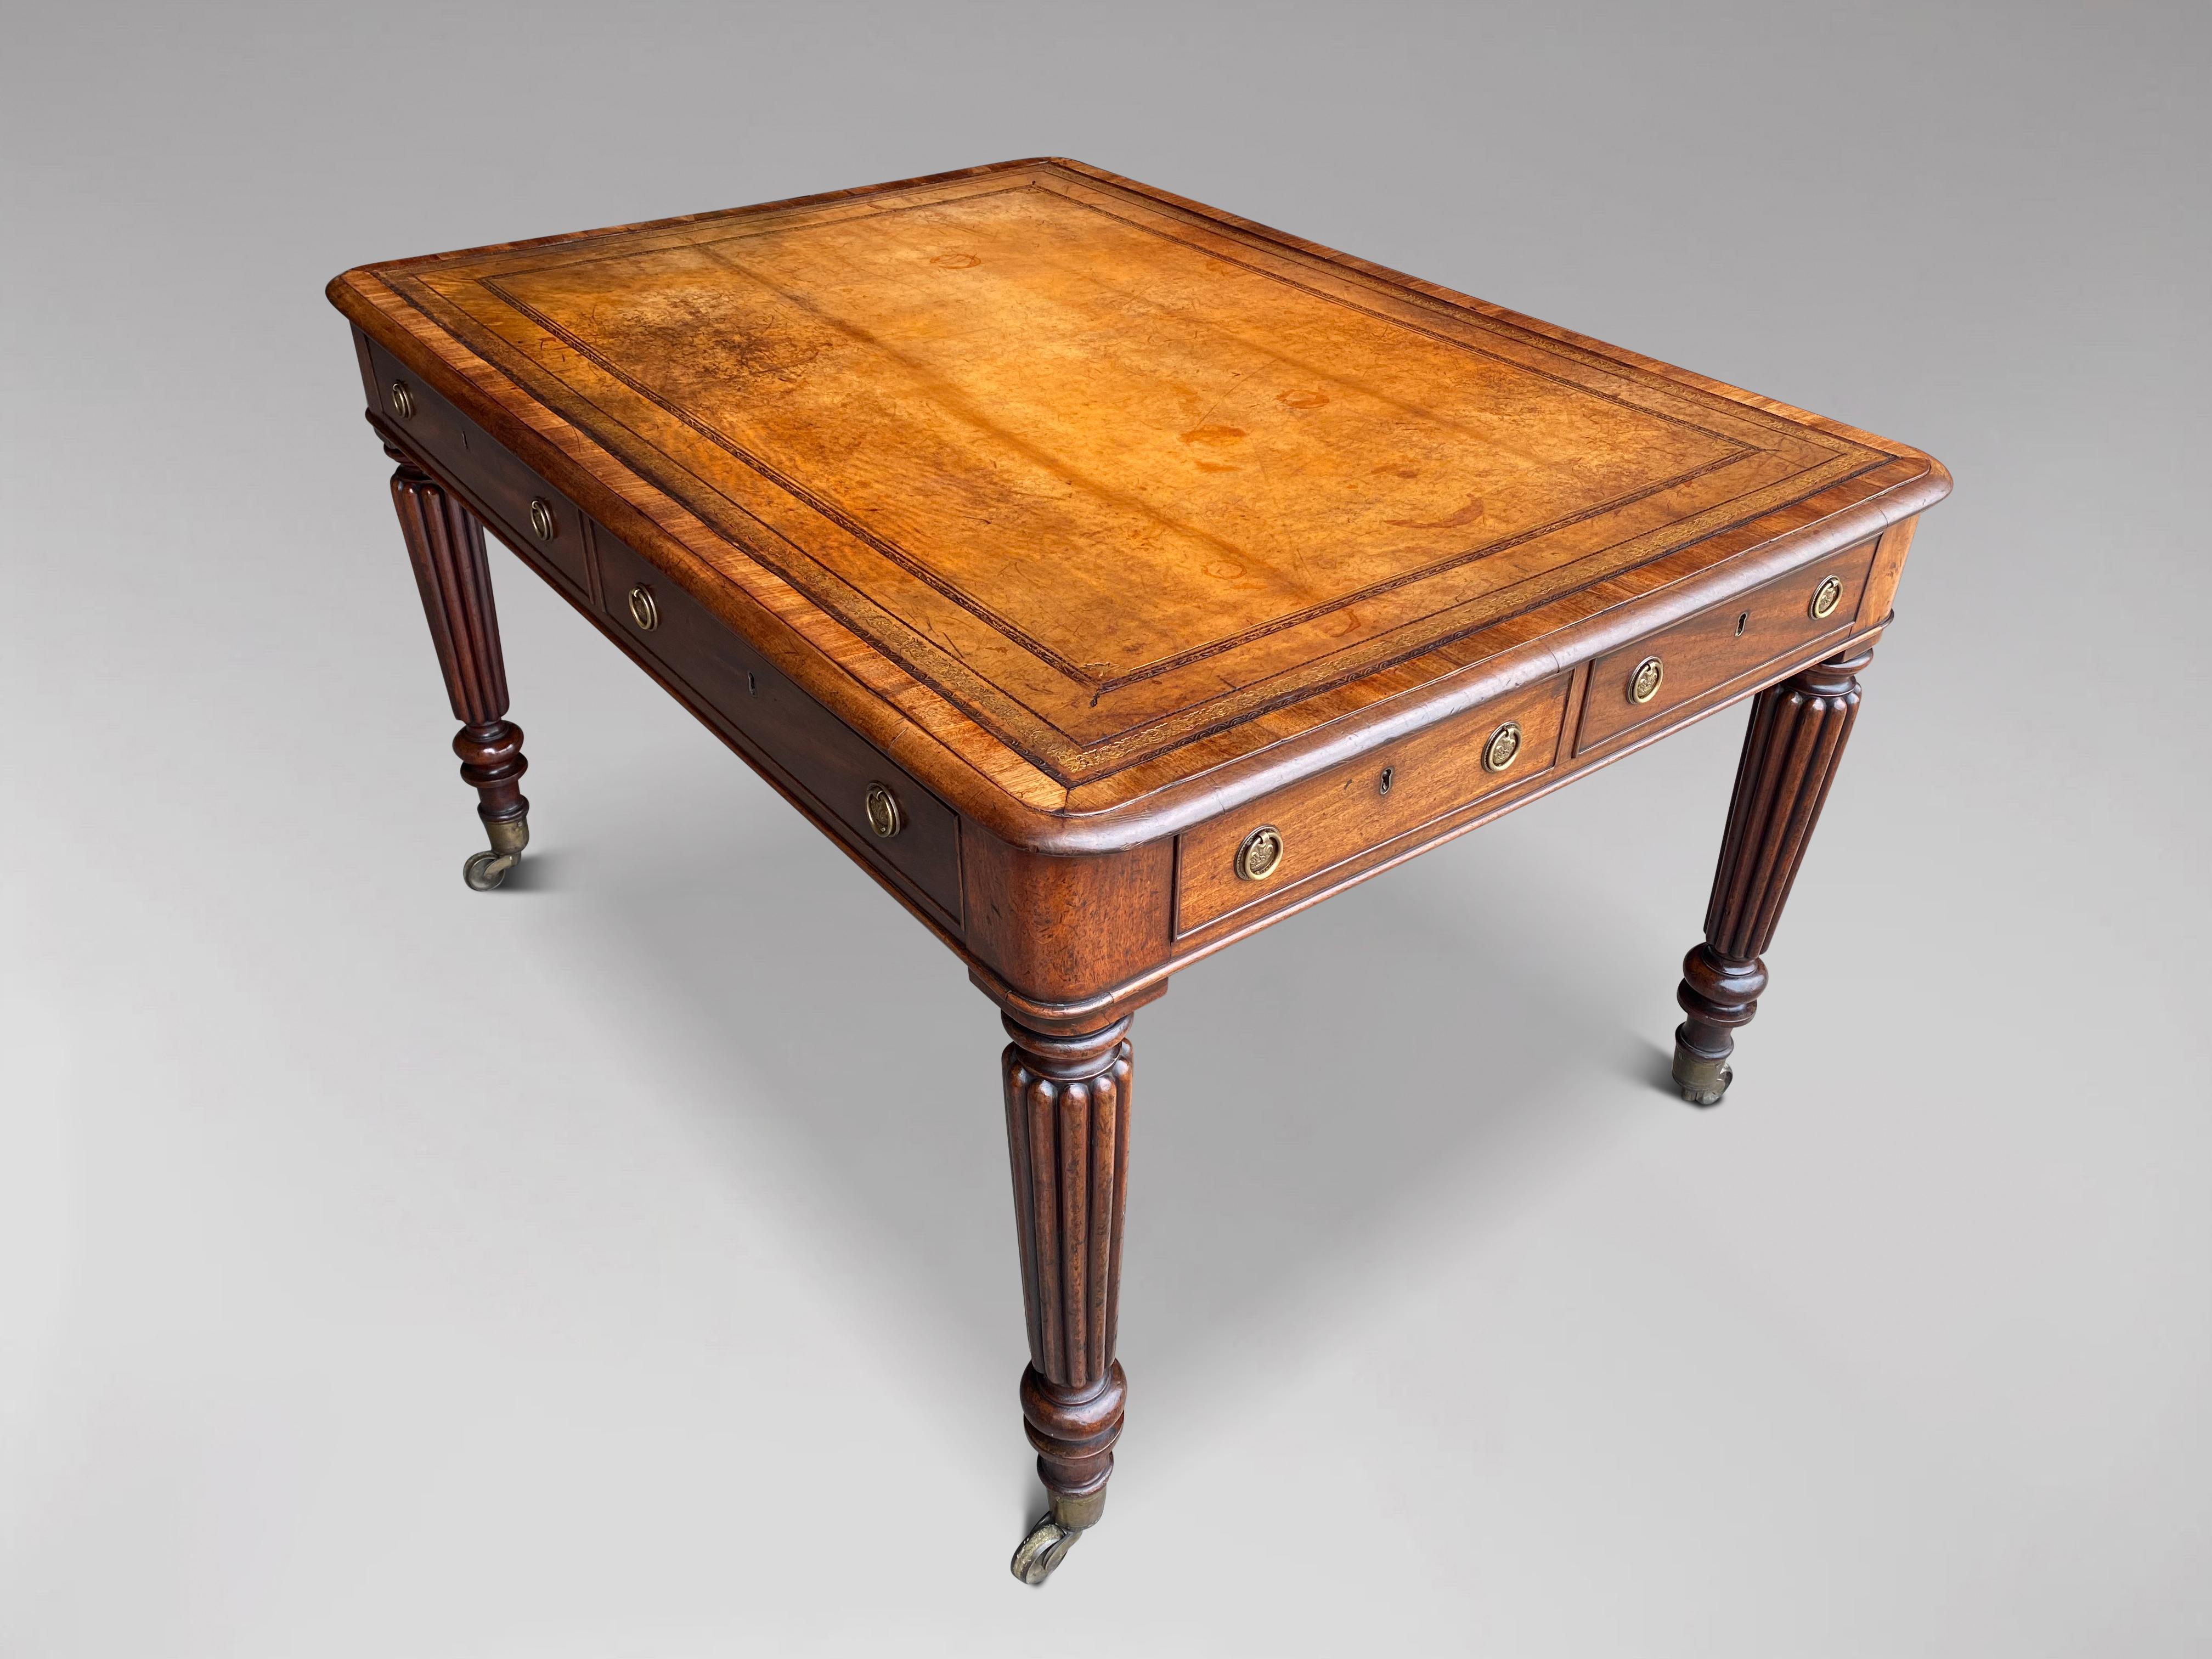 A fine early 19th century, Regency period mahogany partners library writing table. The rounded moulded rectangular top with superb quality light gold brown tooled leather inset top above 4 oak lined drawers with the original Prince of Wales feathers